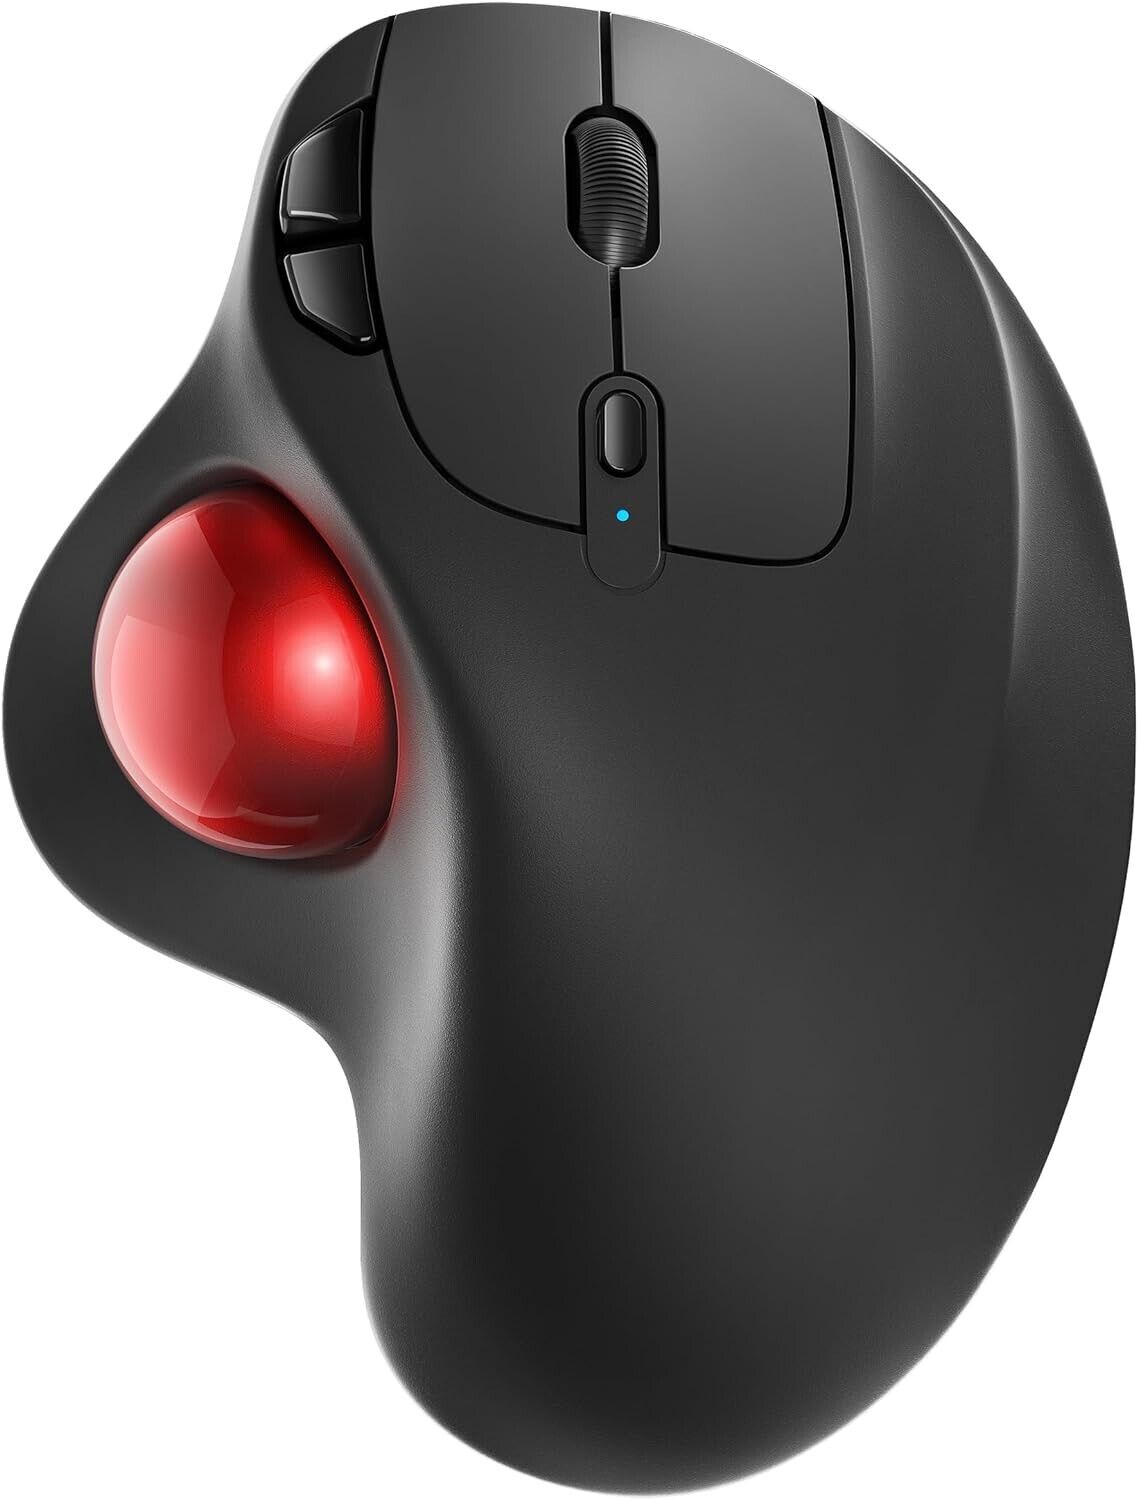 Nulea M501 Wireless Trackball Mouse Ergonomic along with hard travel case for it